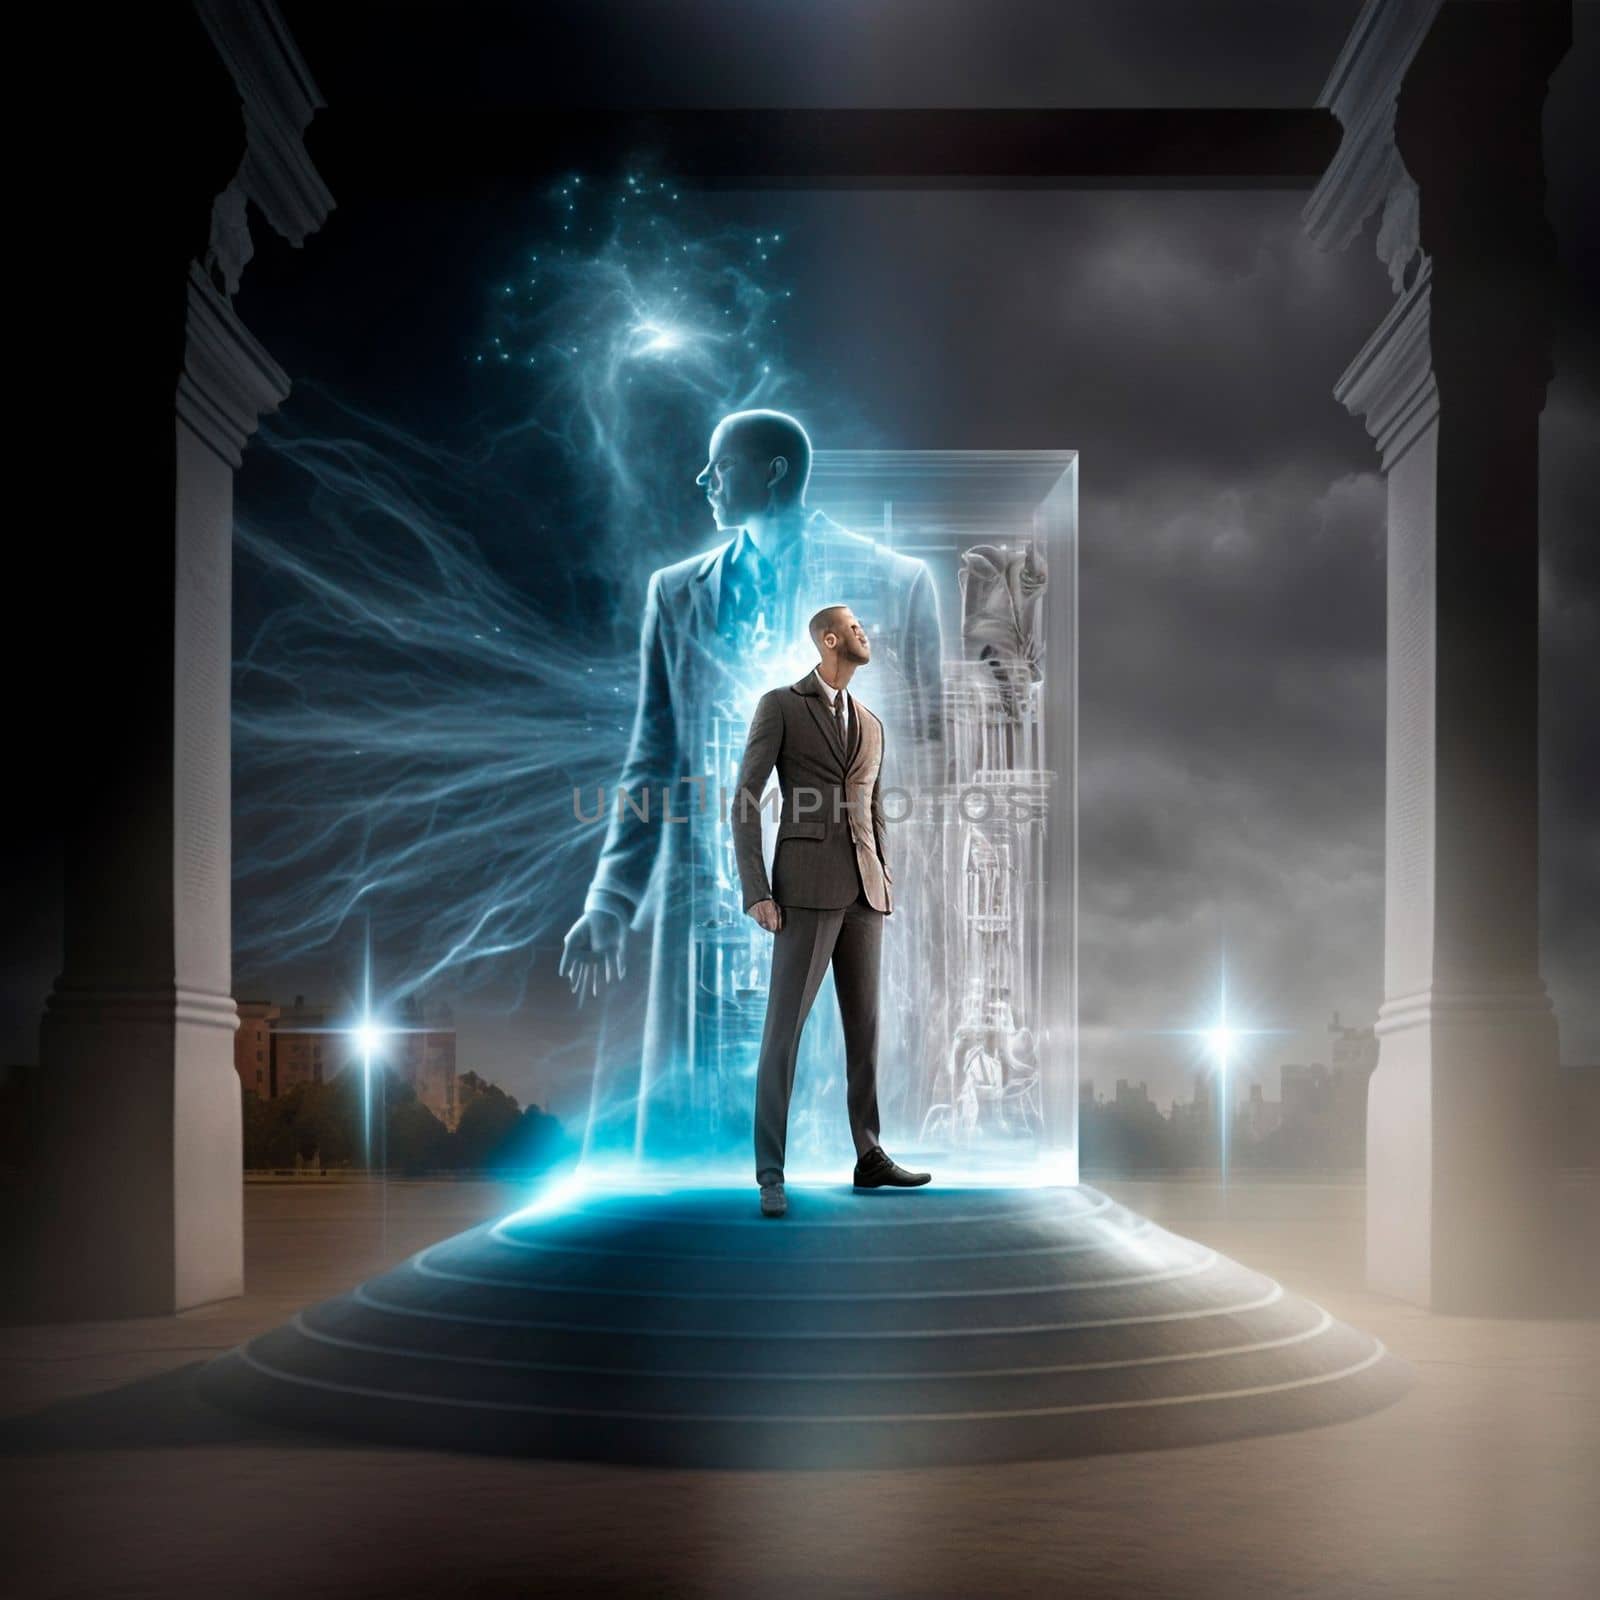 human holography, glow, becoming stronger, insight. High quality illustration